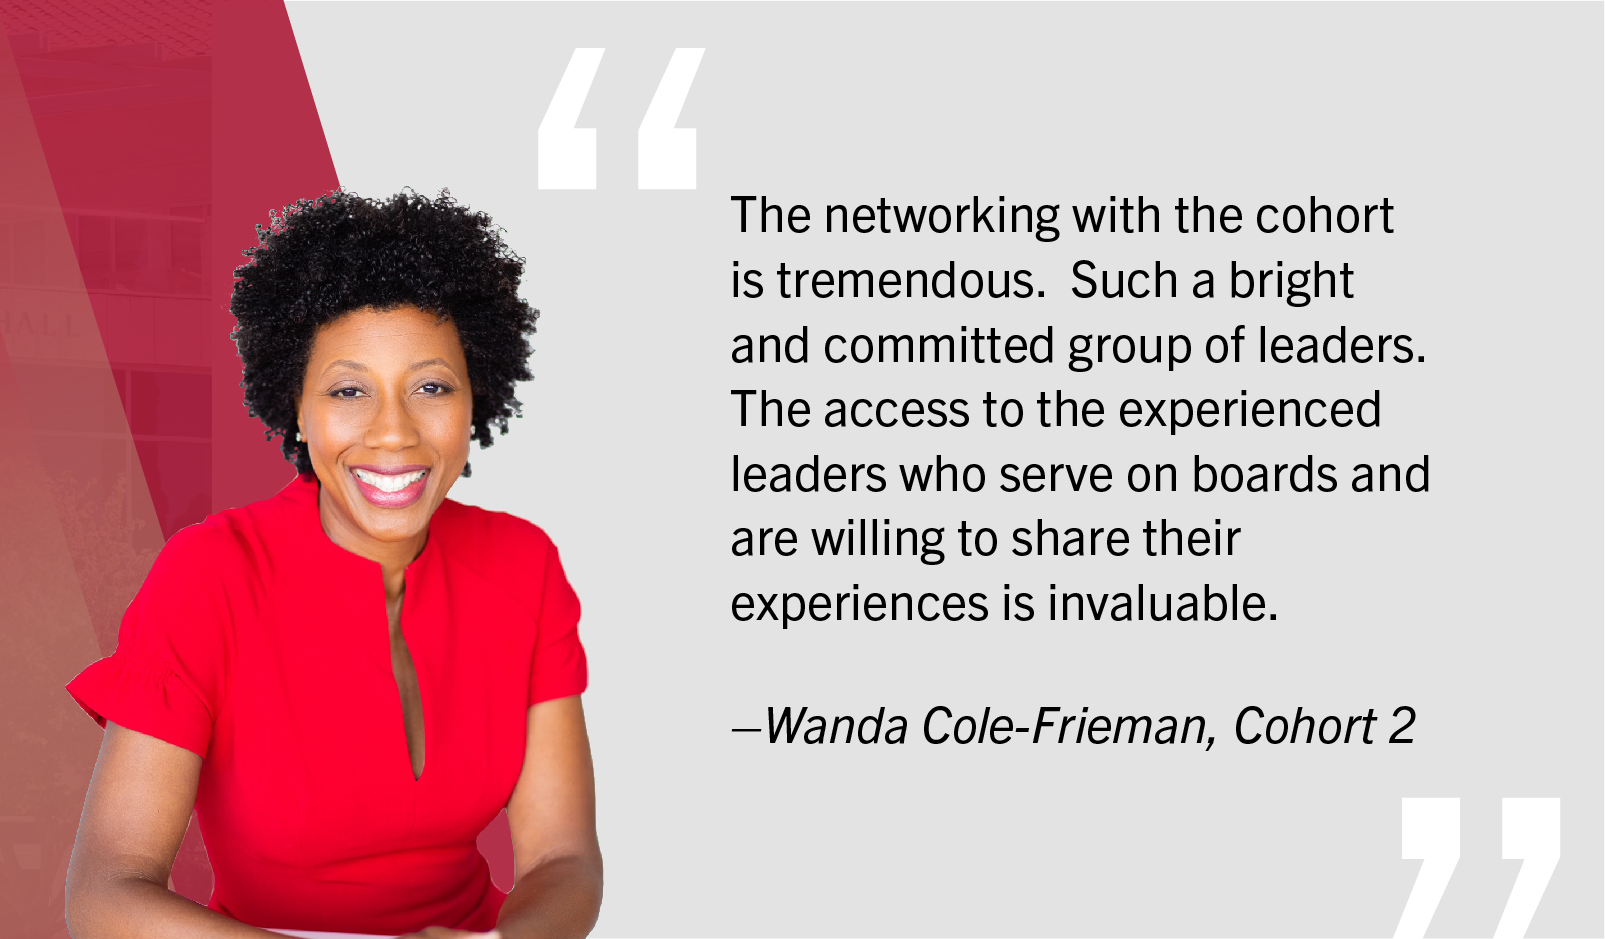 Quote by Wanda Cole-Freiman, Cohort 2